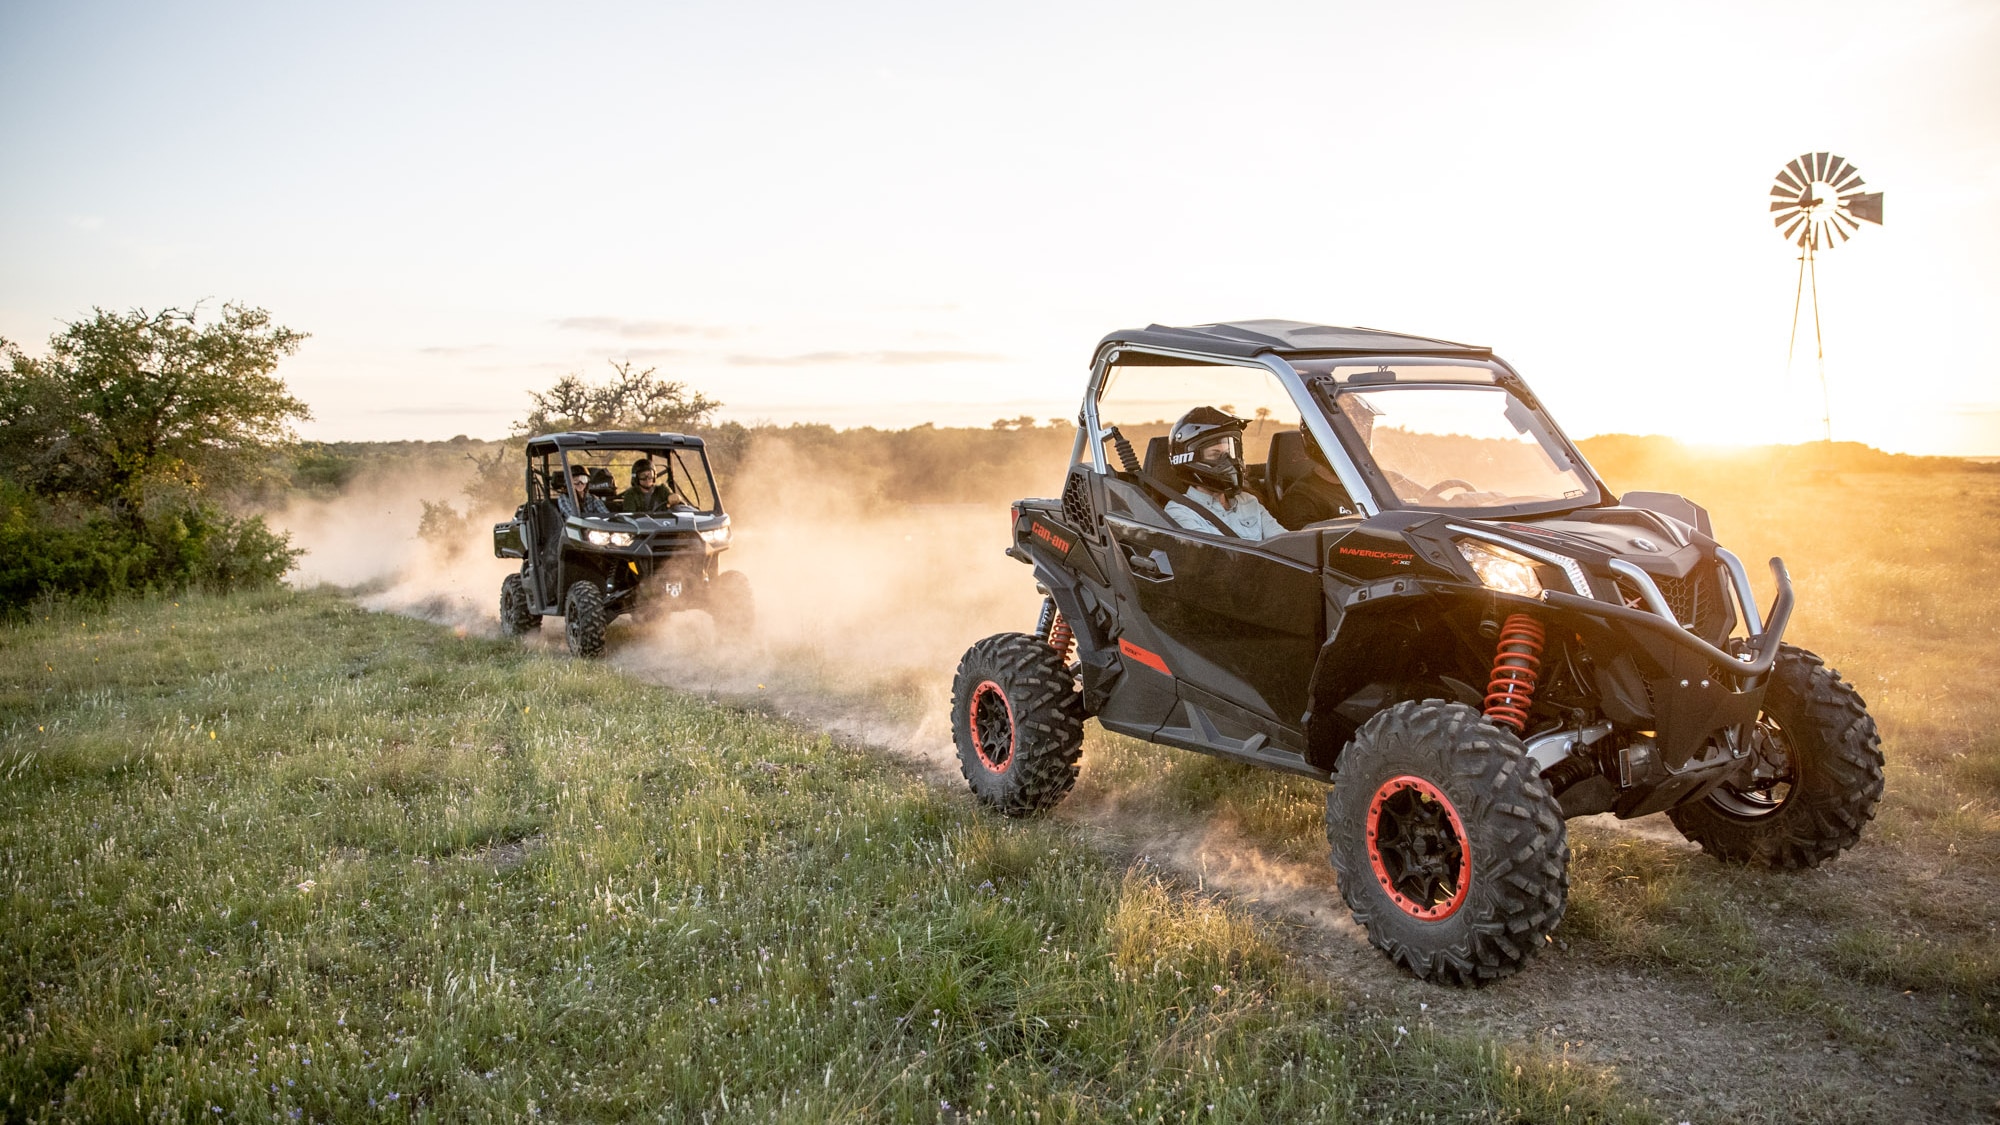 THE COMPLETE SIDE-BY-SIDE (SXS) & UTV BUYER’S GUIDE